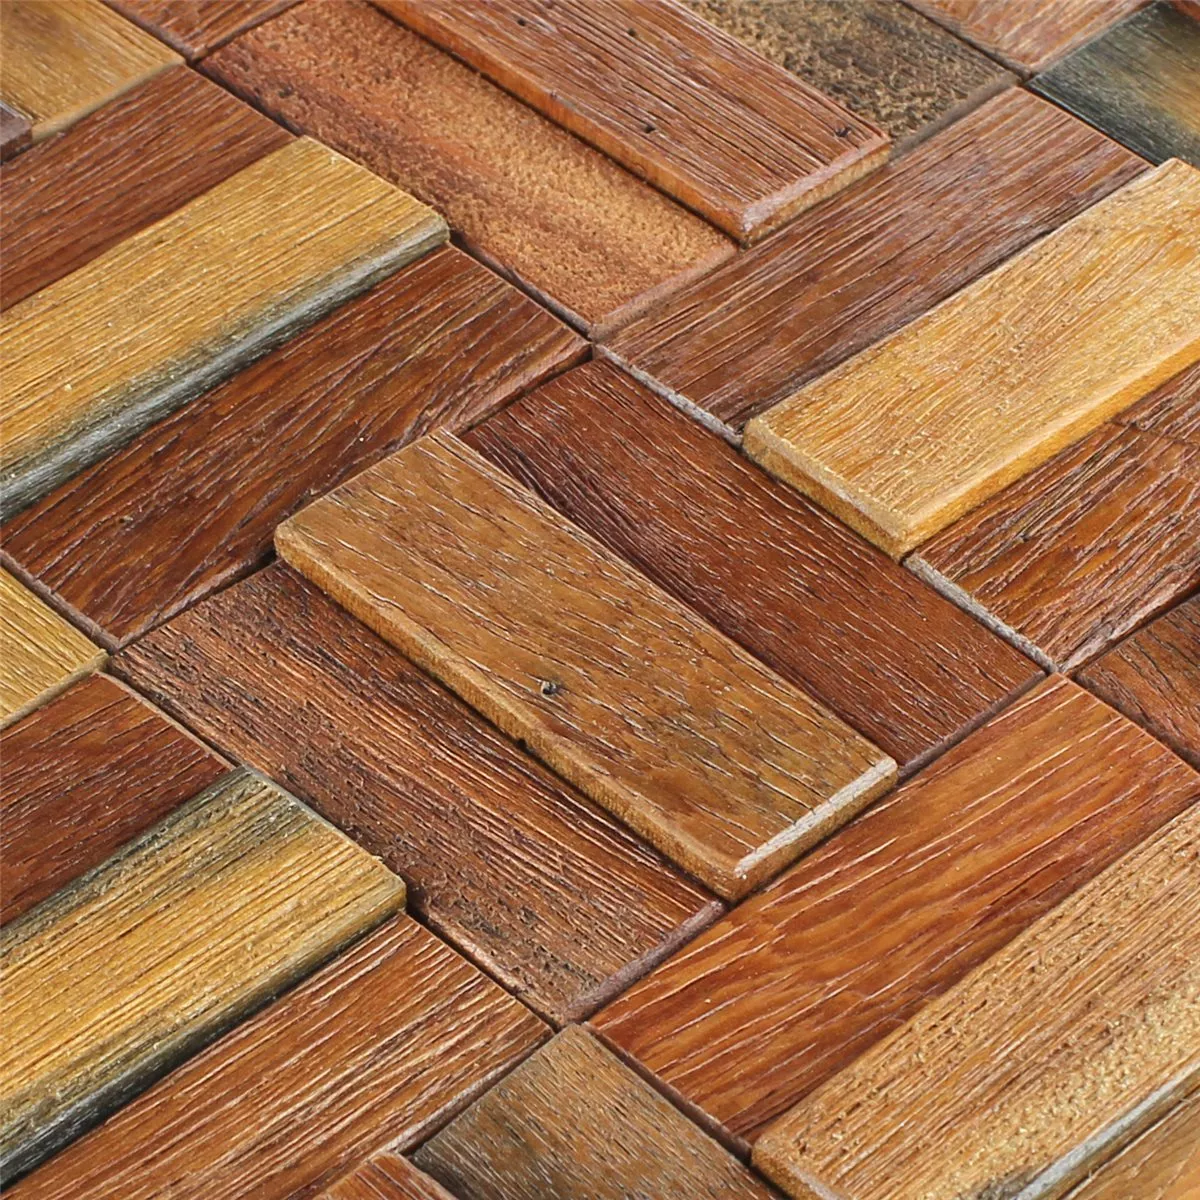 Sample Wood Mosaic Tiles Planks Lacquered